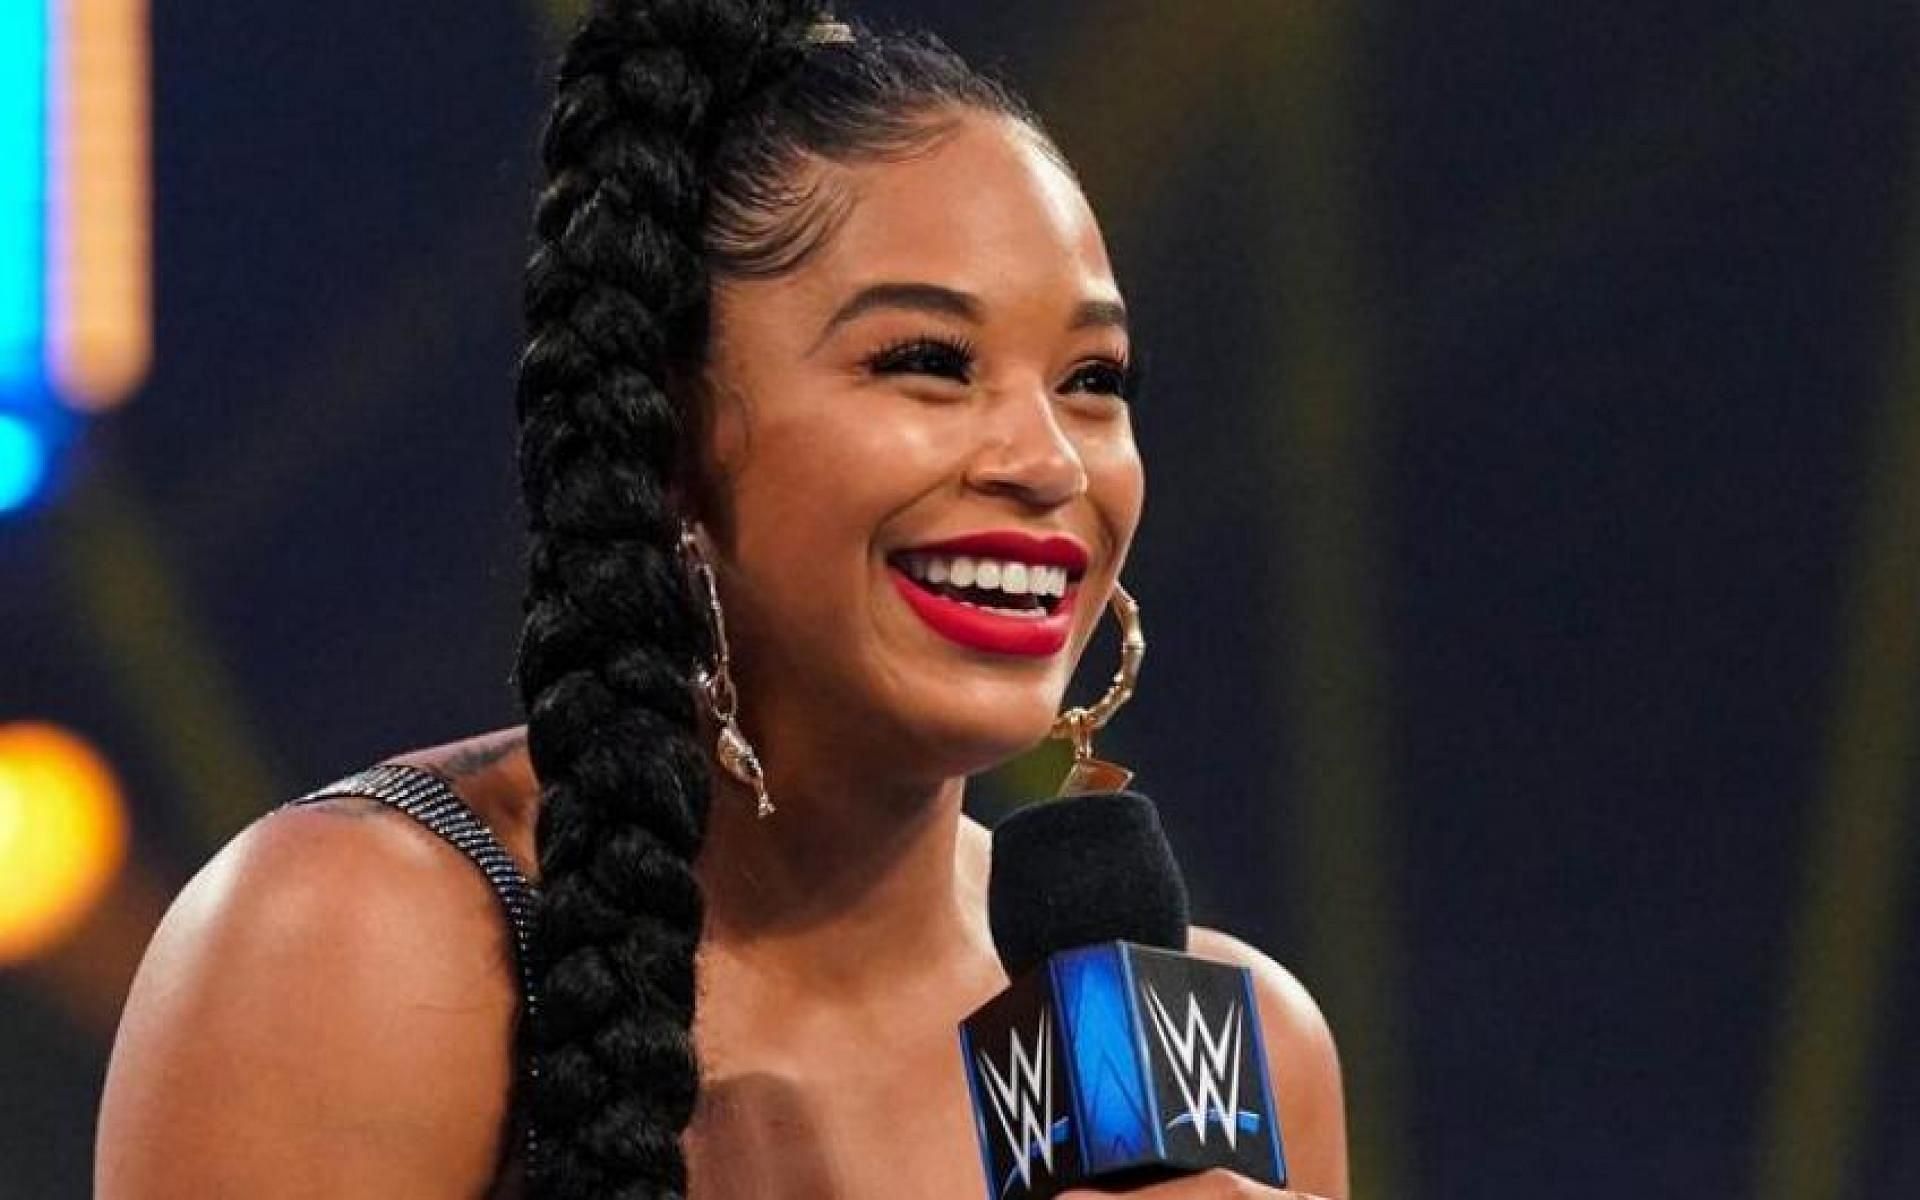 Bianca Belair is a part of RAW after the 2021 WWE Draft